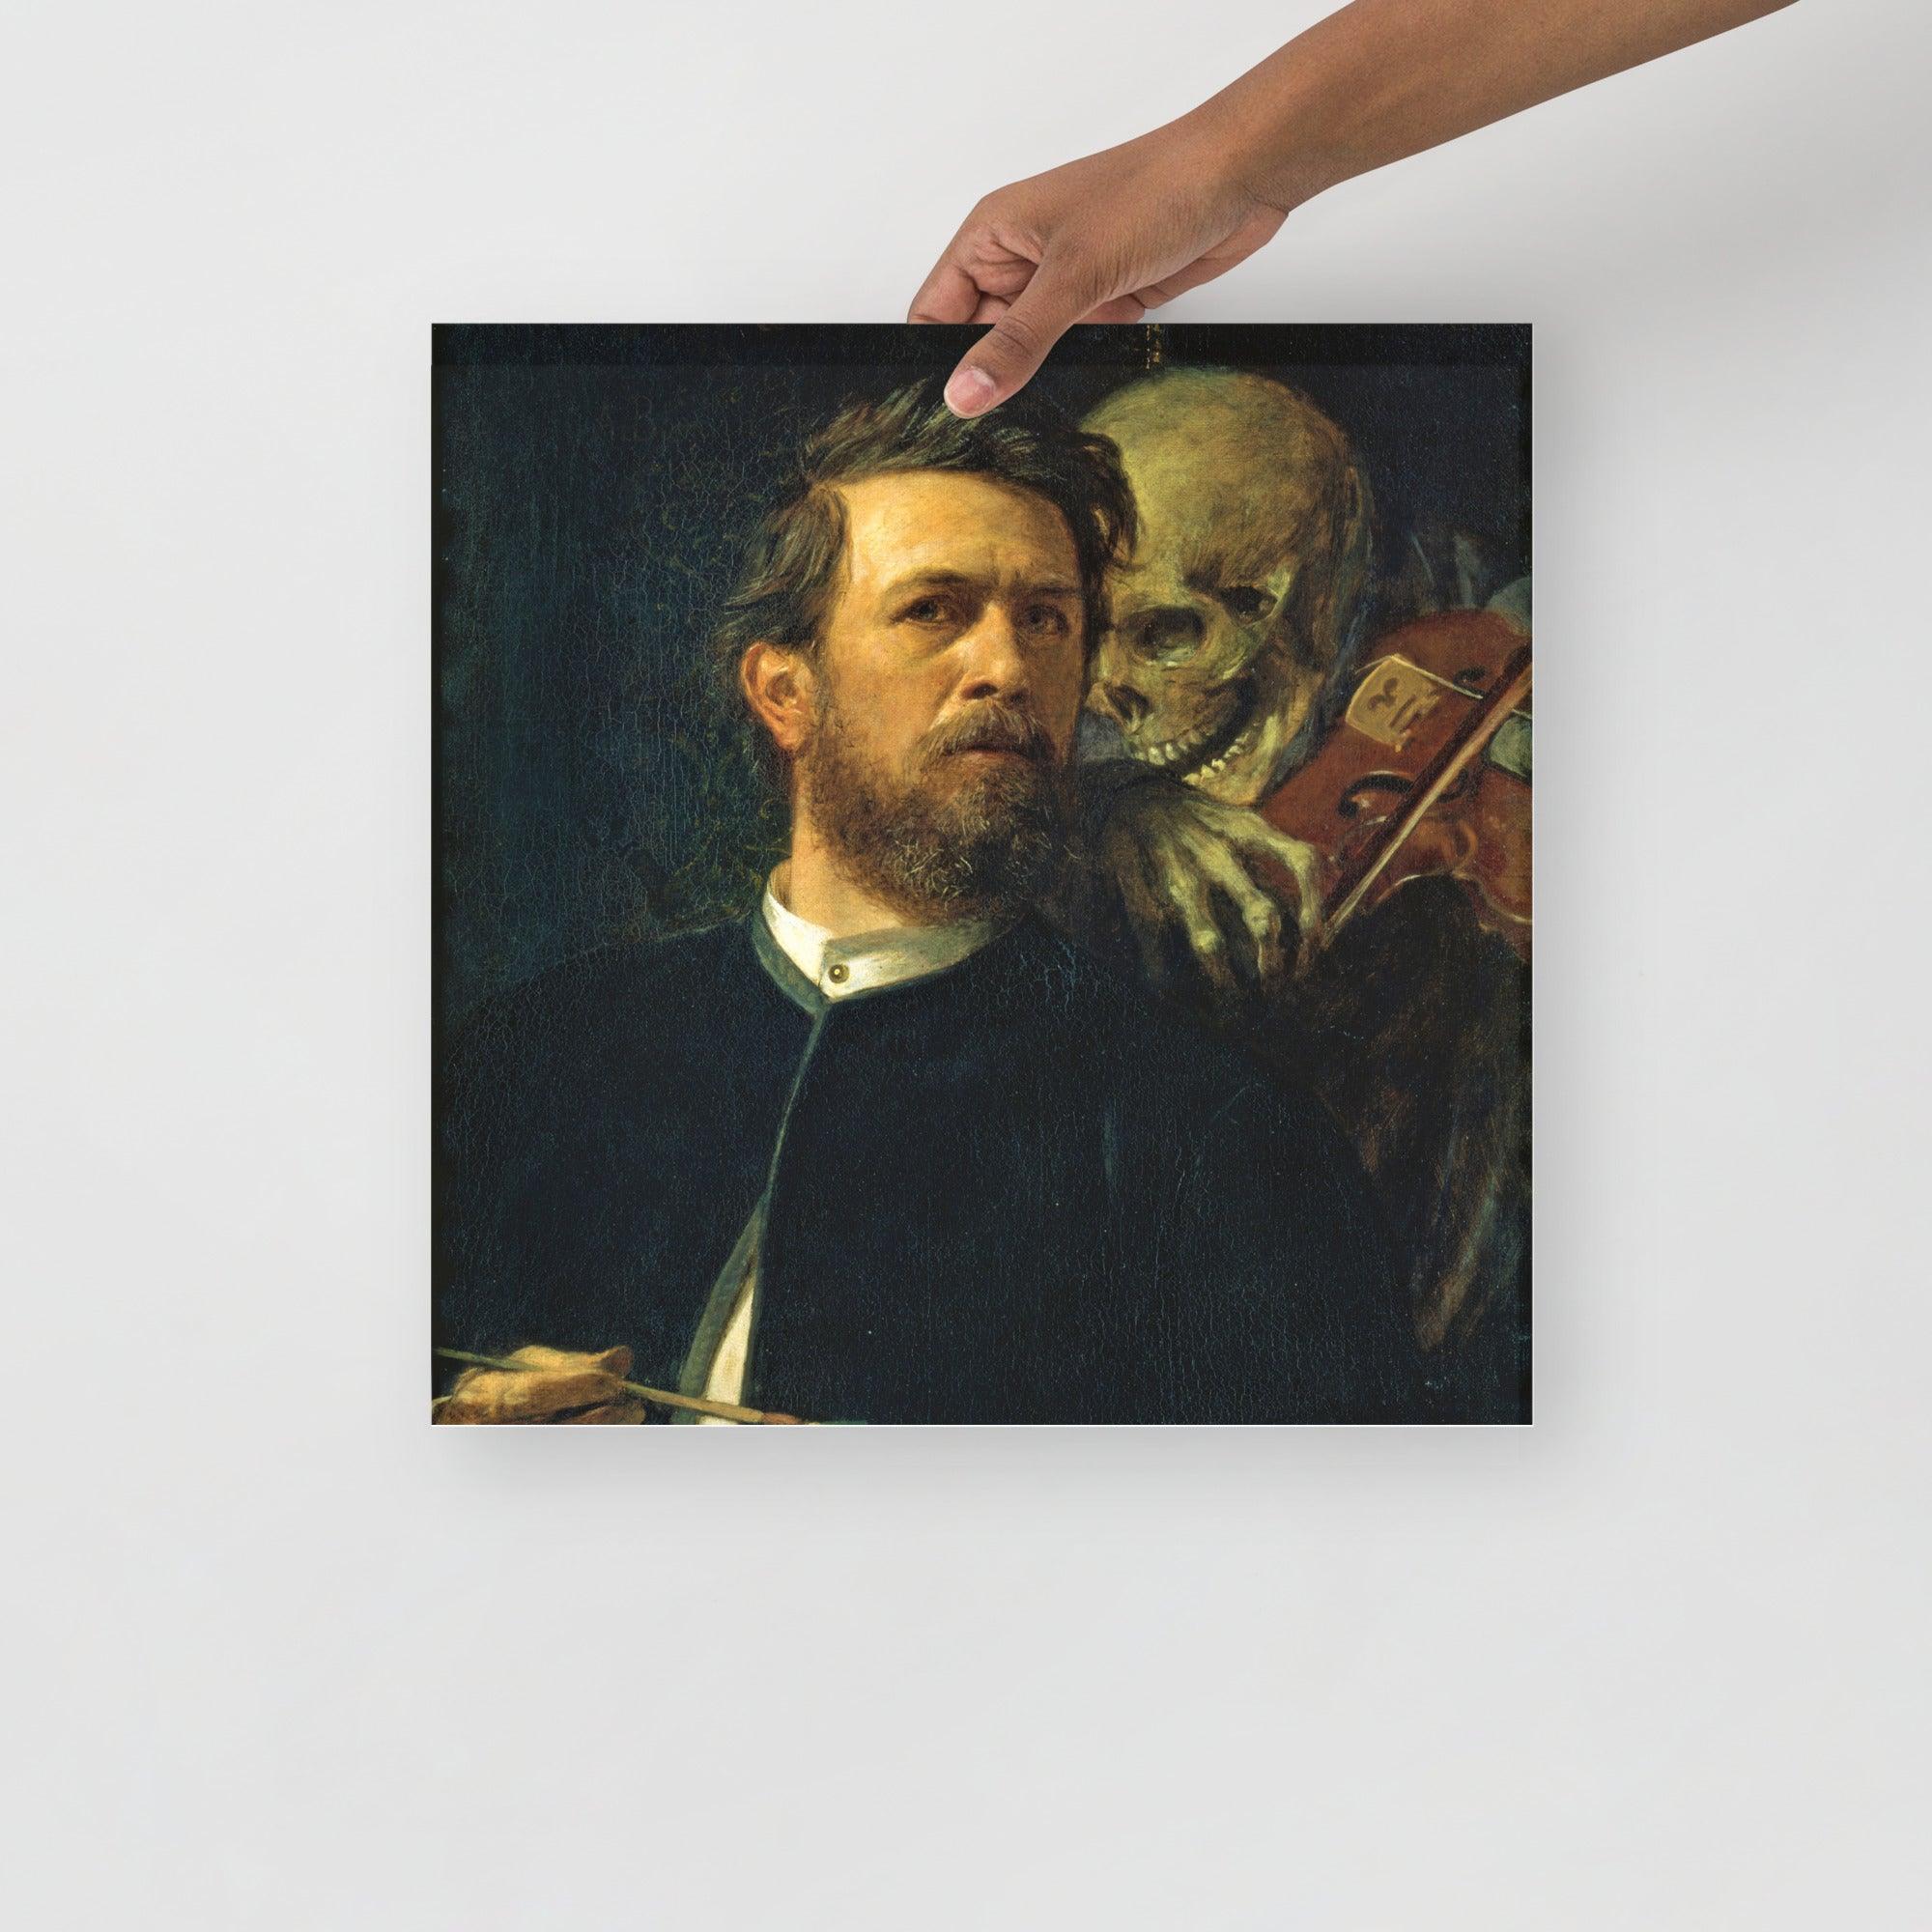 A Self Portrait With Death Playing The Fiddle poster on a plain backdrop in size 16x16”.